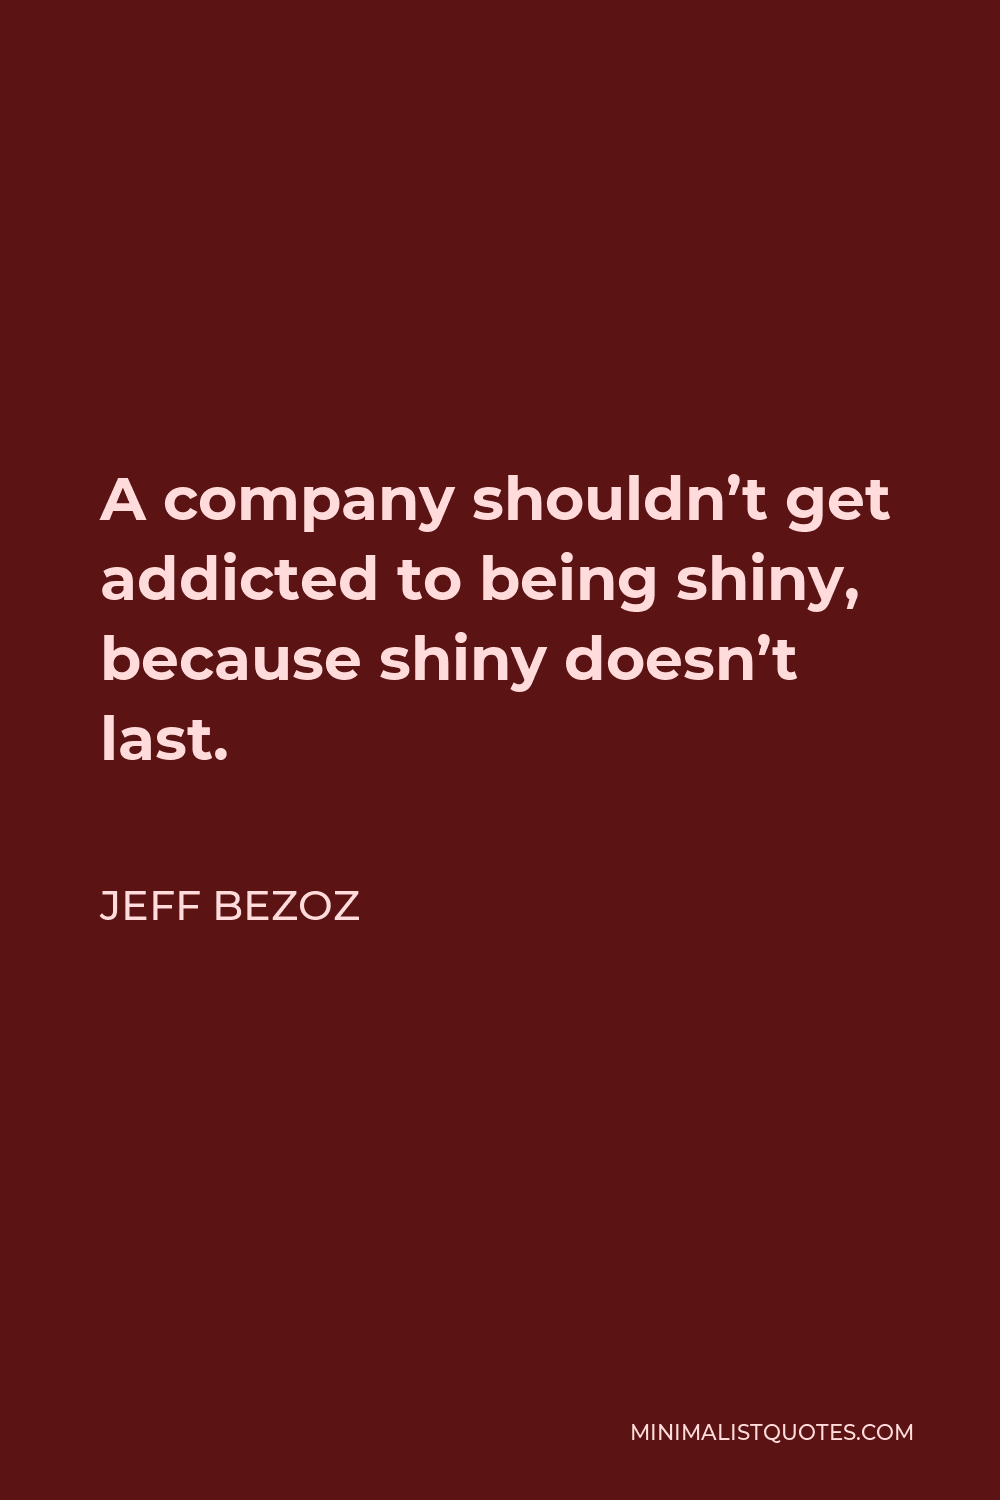 Jeff Bezoz Quote - A company shouldn’t get addicted to being shiny, because shiny doesn’t last.